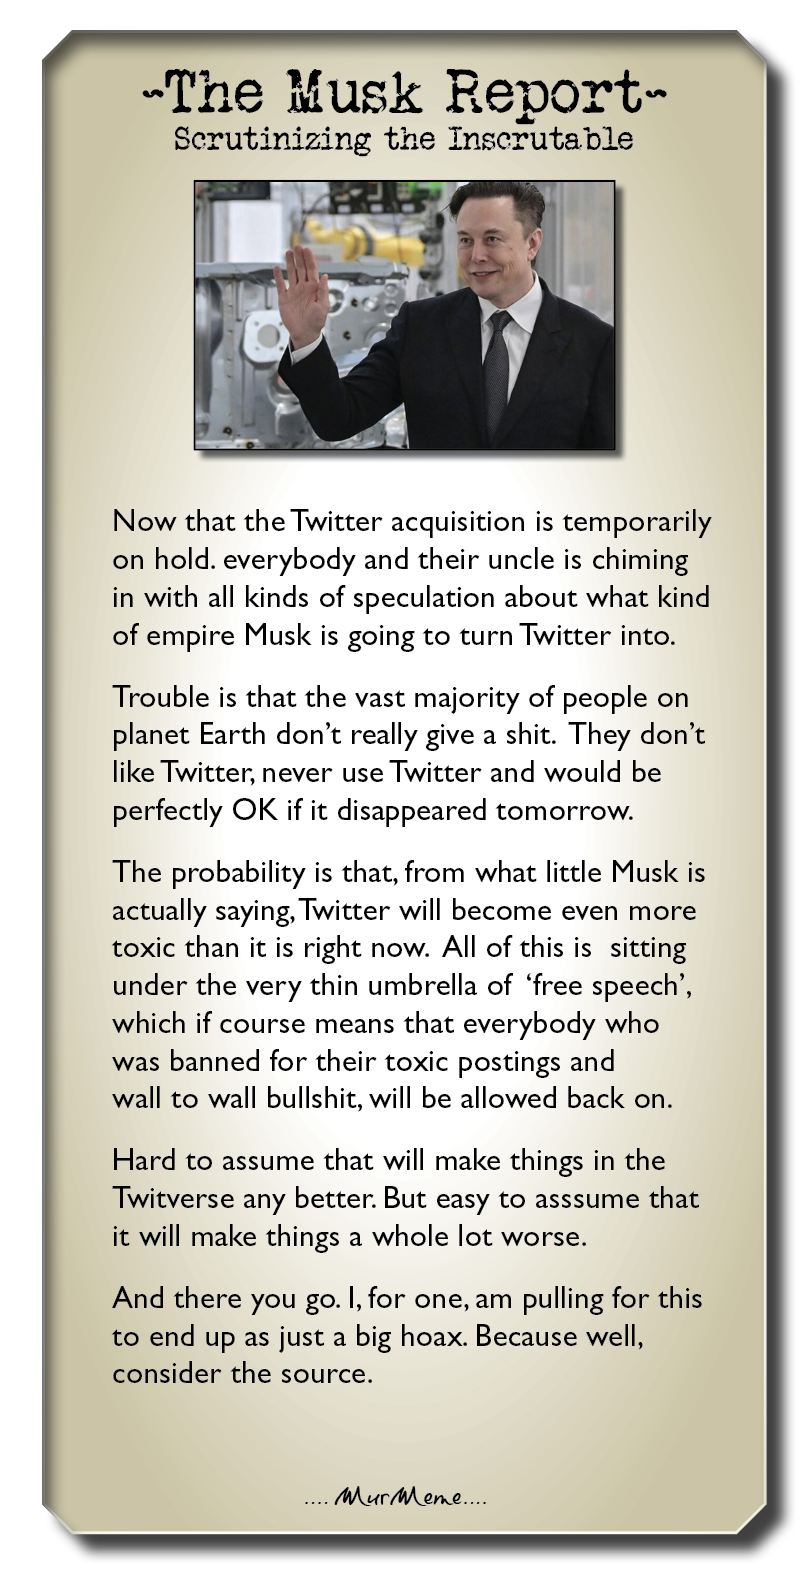 ~The Musk Eeport-

Scerutinizing the Inscrutable

Now that the Twitter acquisition is temporarily
on hold. everybody and their uncle is chiming
in with all kinds of speculation about what kind
of empire Musk is going to turn Twitter into.

Trouble is that the vast majority of people on
planet Earth don't really give a shit. They don't
like Twitter, never use Twitter and would be
perfectly OK if it disappeared tomorrow.

The probability is that, from what little Musk is
actually saying, Twitter will become even more
toxic than it is right now. All of this is sitting
under the very thin umbrella of ‘free speech’,
which if course means that everybody who
was banned for their toxic postings and

wall to wall bullshit, will be allowed back on.

Hard to assume that will make things in the
Twitverse any better. But easy to asssume that
it will make things a whole lot worse.

And there you go. |, for one, am pulling for this
to end up as just a big hoax. Because well,
consider the source.